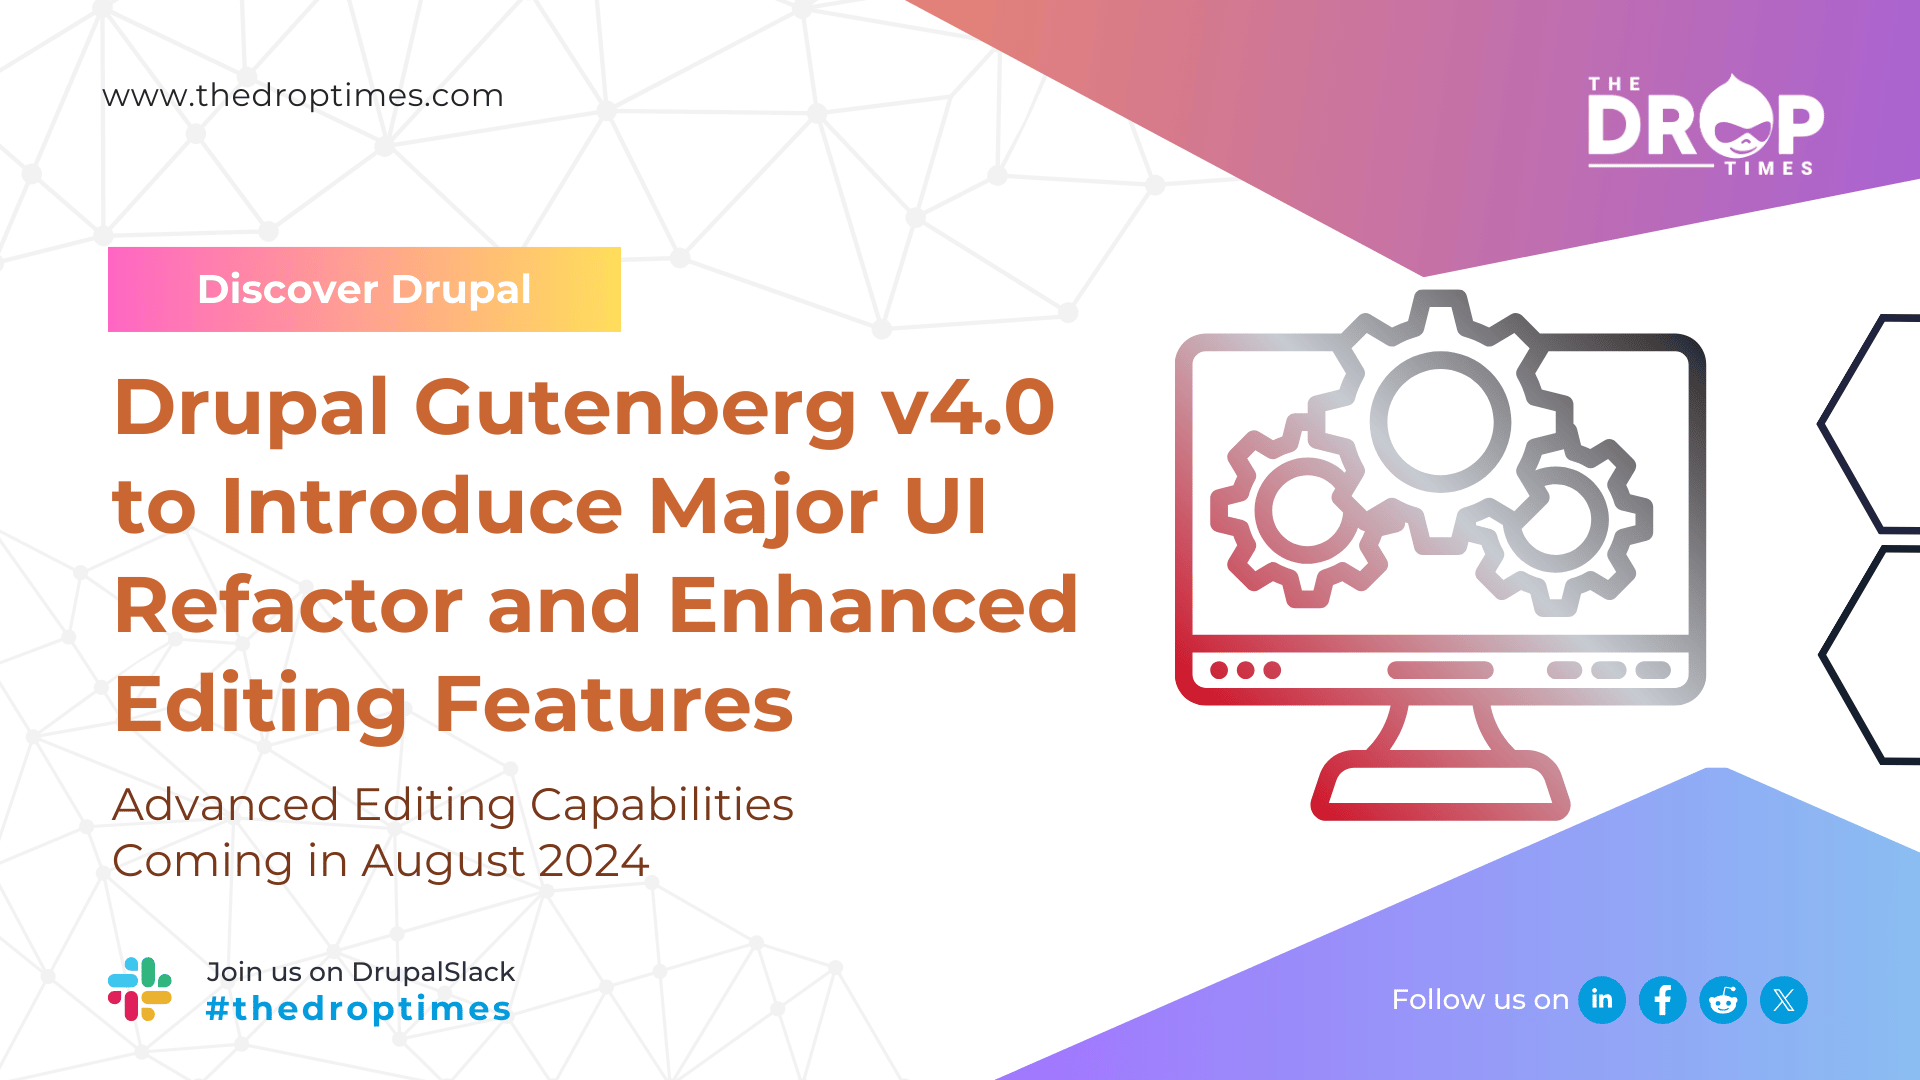 Drupal Gutenberg v4.0 to Introduce Major UI Refractor and Enhanced Editing Features